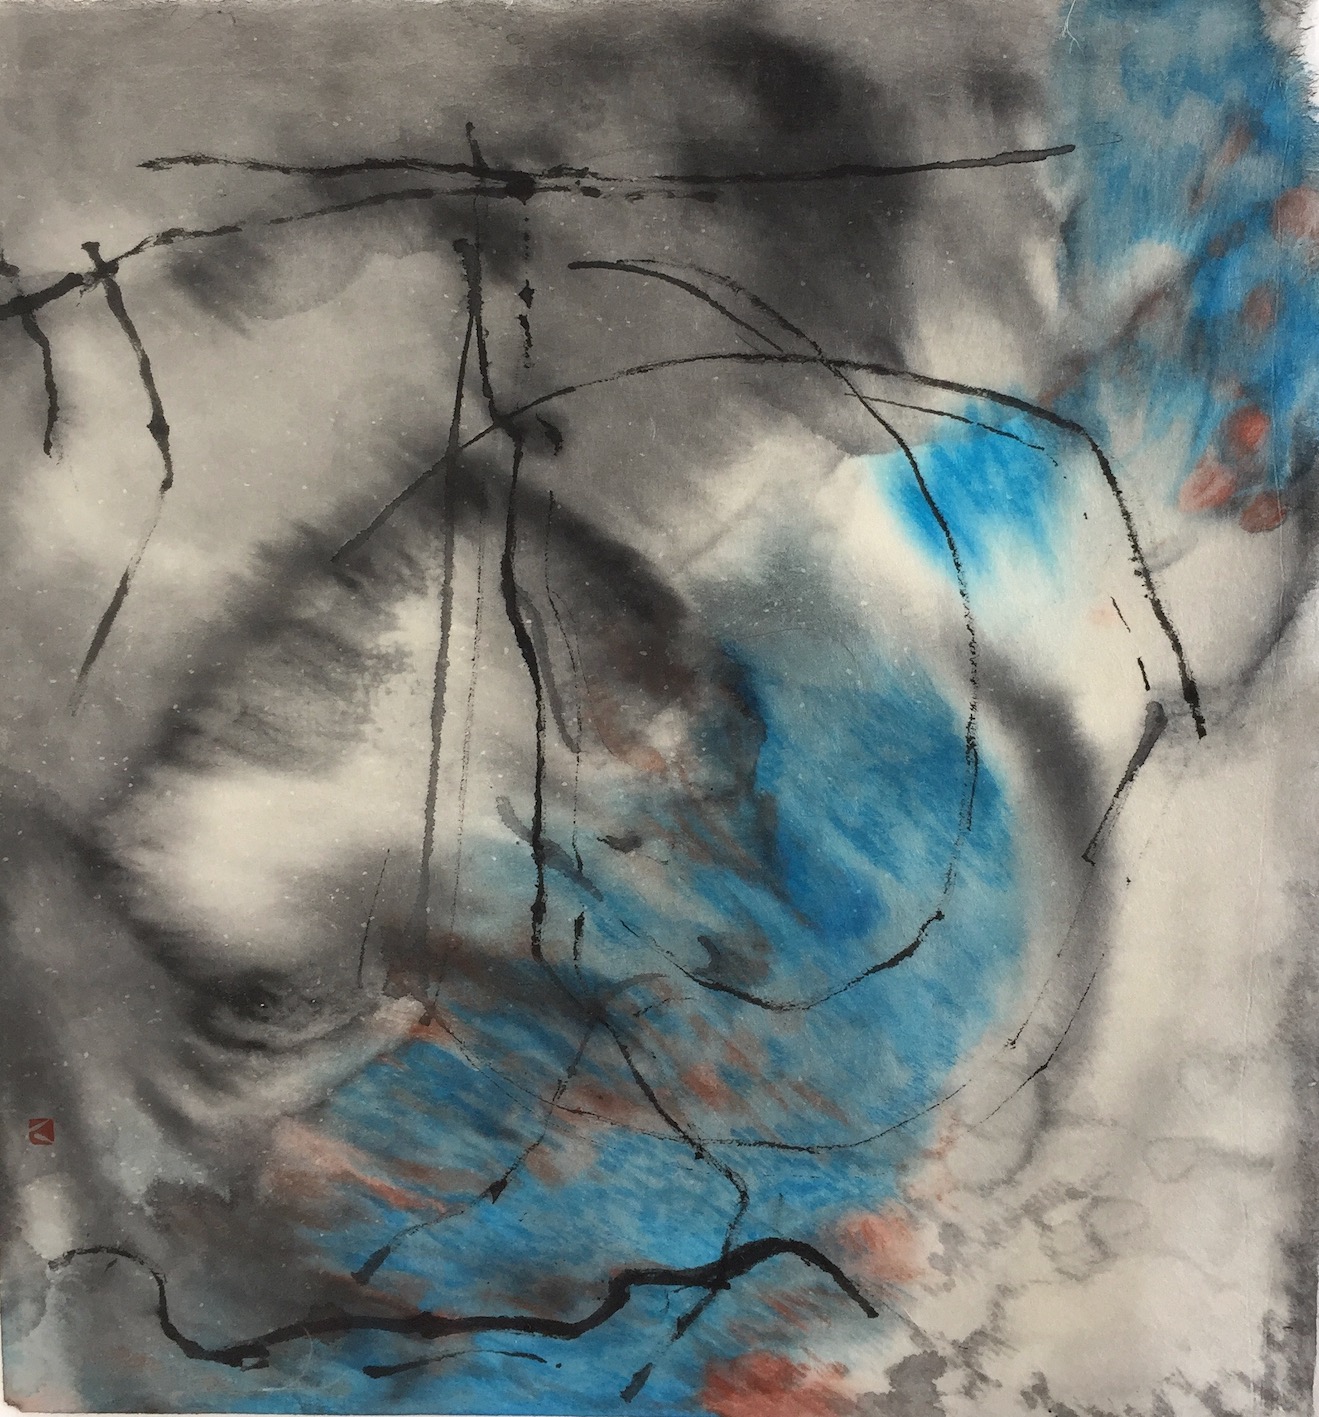 Clouds Dancing 4 24 X 25 cms Sumi ink, acrylic, 踊る雲 4 墨、アクリル　　2020